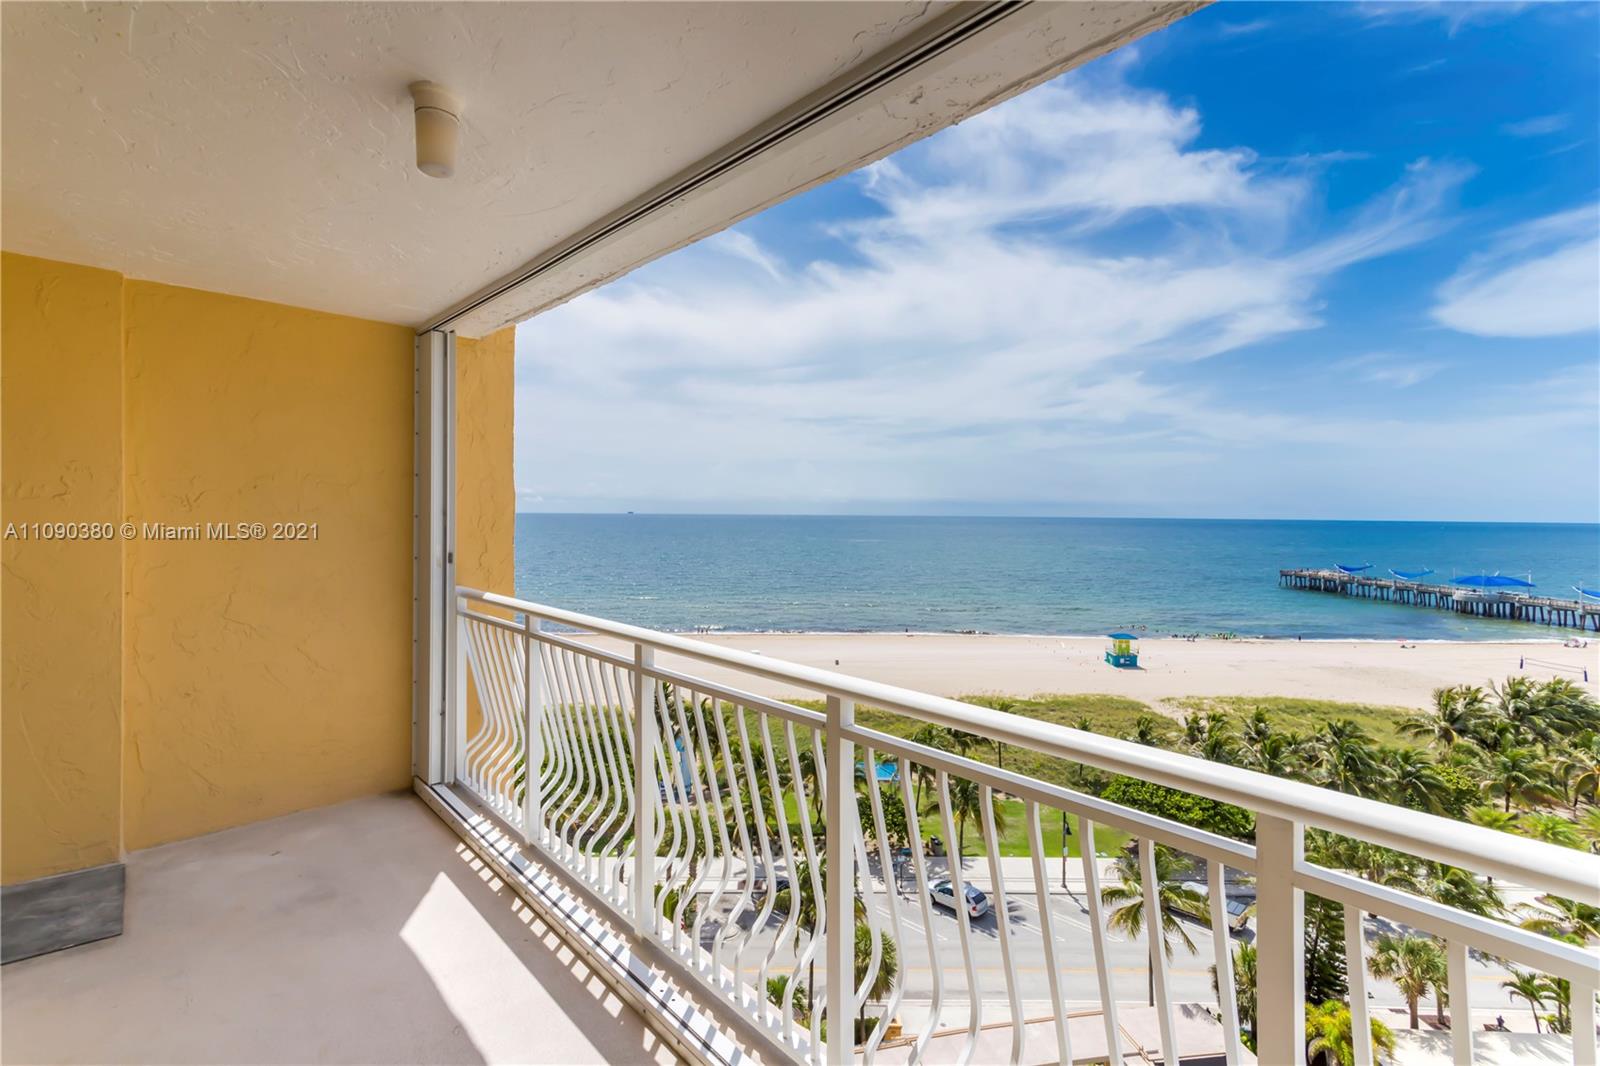 Direct Ocean front, spacious 2BR/2B condo, located in prime Pompano Beach, in the charming ‘Bermuda House’. This immaculate, 11th floor unit has spectacular ocean vistas throughout, with year round trade winds off the sea enjoyed on the seated balcony. Granite and stainless steel Kitchen opens onto a large dining and living area, suited for luxurious comfort and design ease. Abundant closets and storage, Central AC, and assigned locker in storage room. Located next to the fantastic Pompano Pier, steps away the best dining and entertainment along the beach with a modernized downtown Ocean Boulevard offering all amenities. Bermuda House has done some upgrades needed for the building's 40 Year Certification and is in great condition. There are no current special assessments.